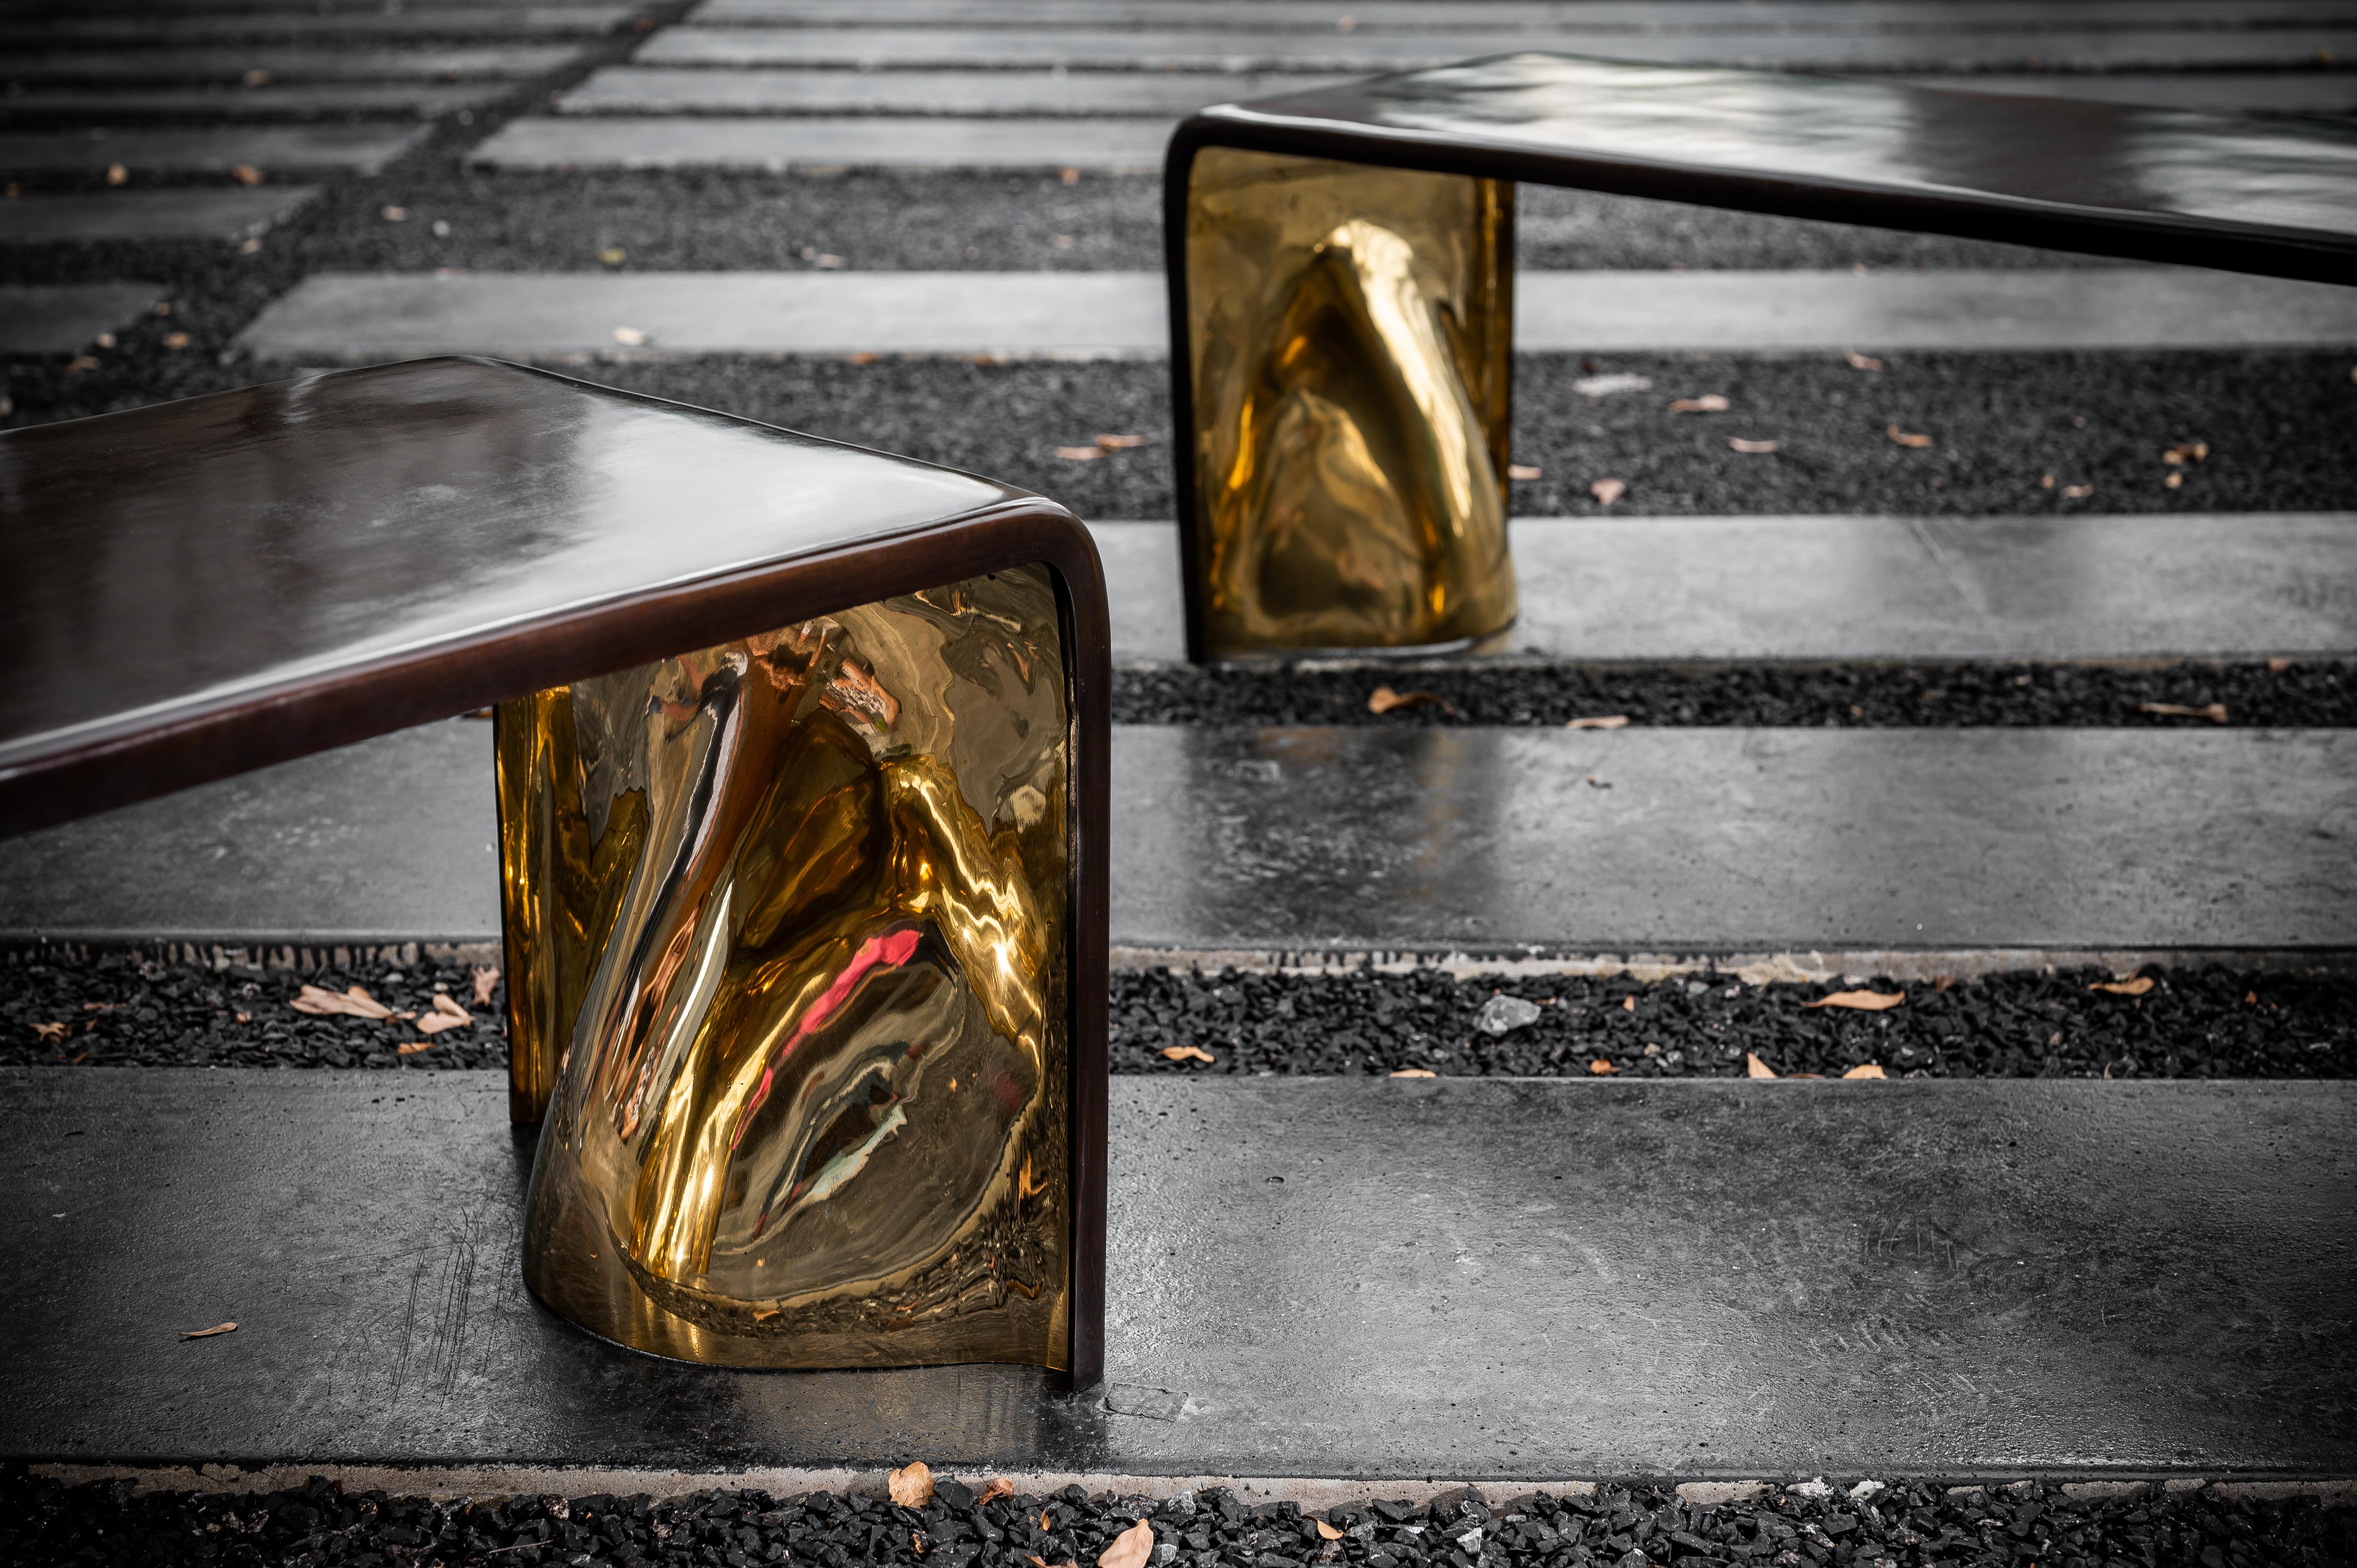 The large Khetan bench is a bronze sculpture inspired by contemporary artists such as Constantin Brancusi and Isamu Noguchi. Cast using the lost wax method, the bench is a museum quality piece shown in dark bronze with a polished gold bronze